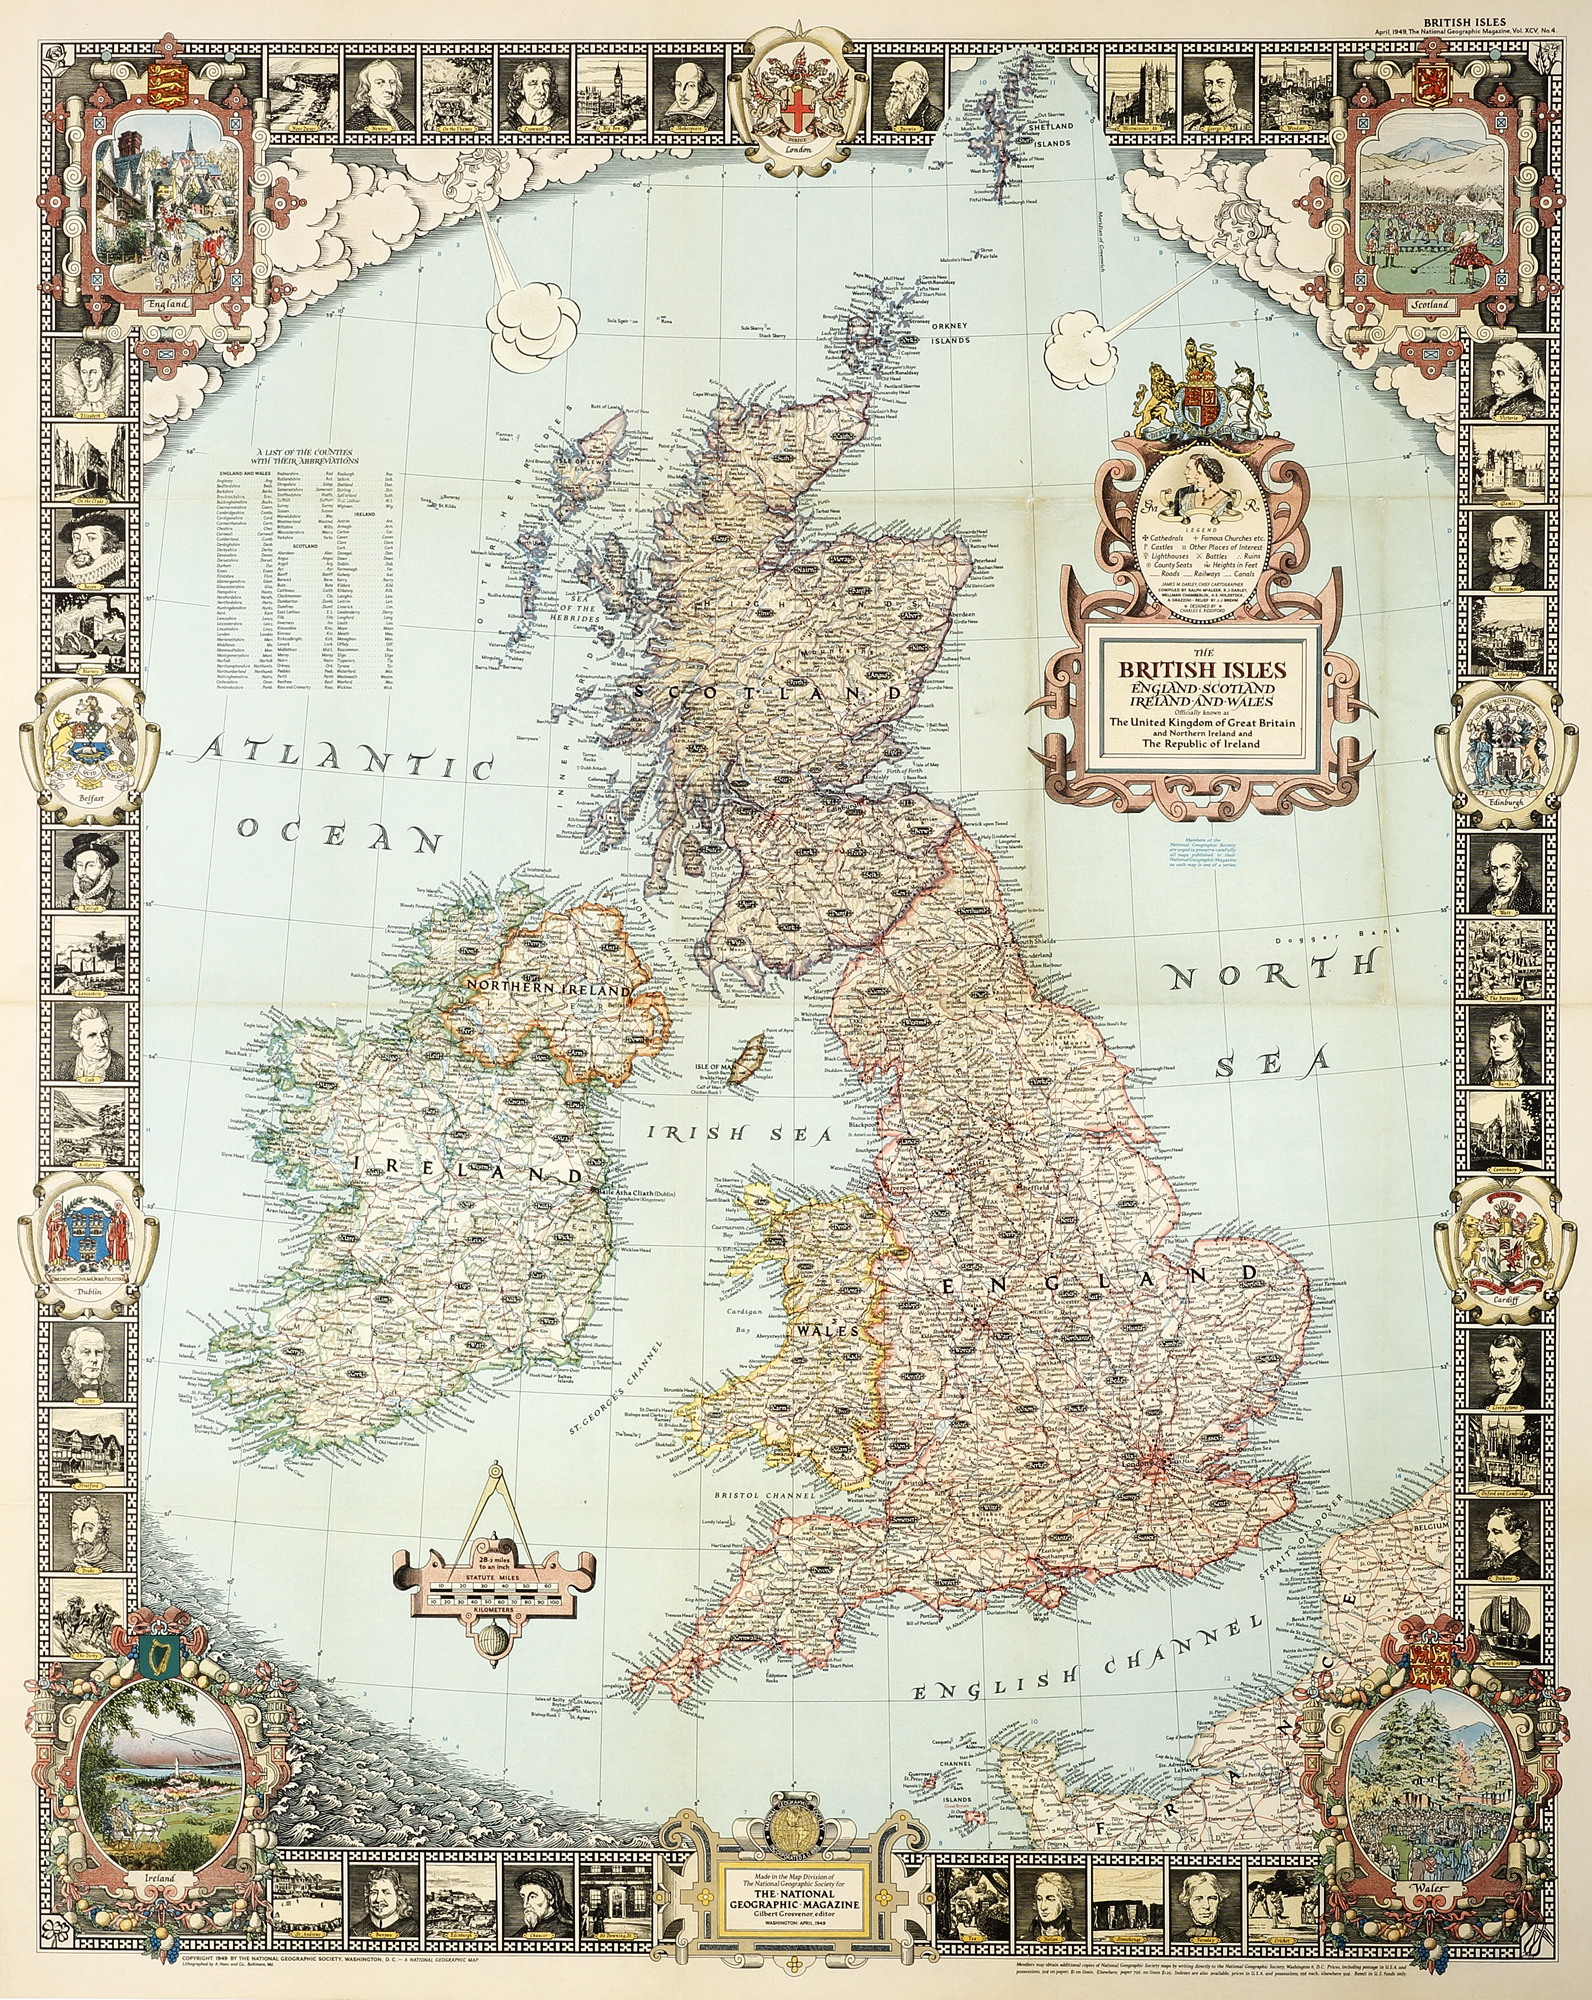 The British Isles England, Scotland, Ireland and Wales. - Vintage Print from 1949